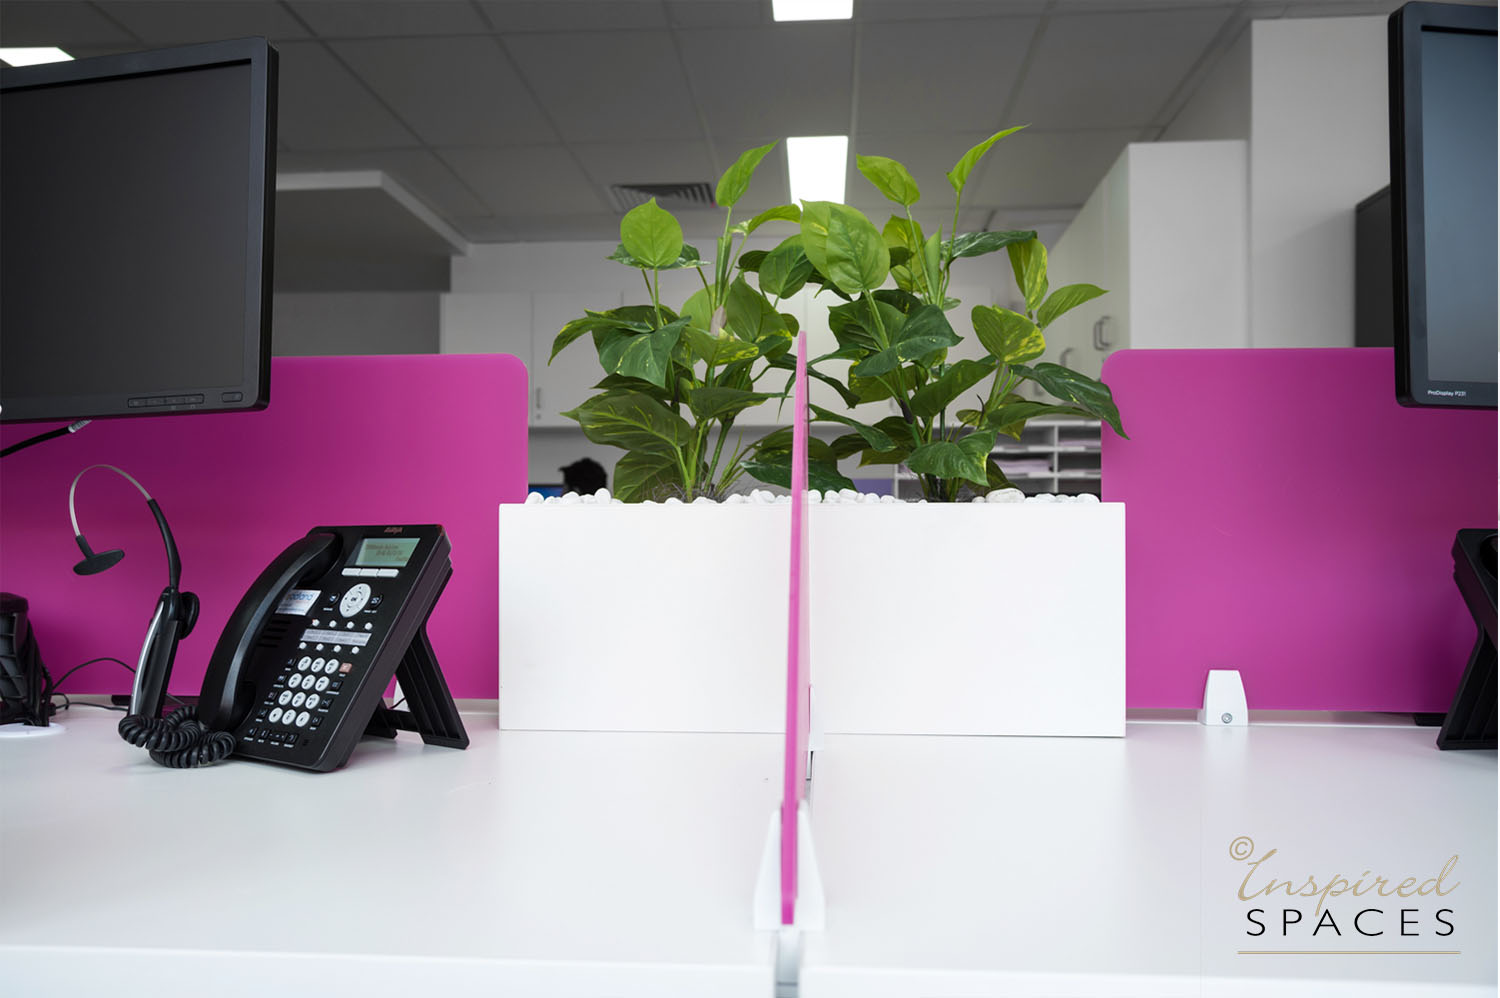 The green foliage compliments the white desk with pops of pink 